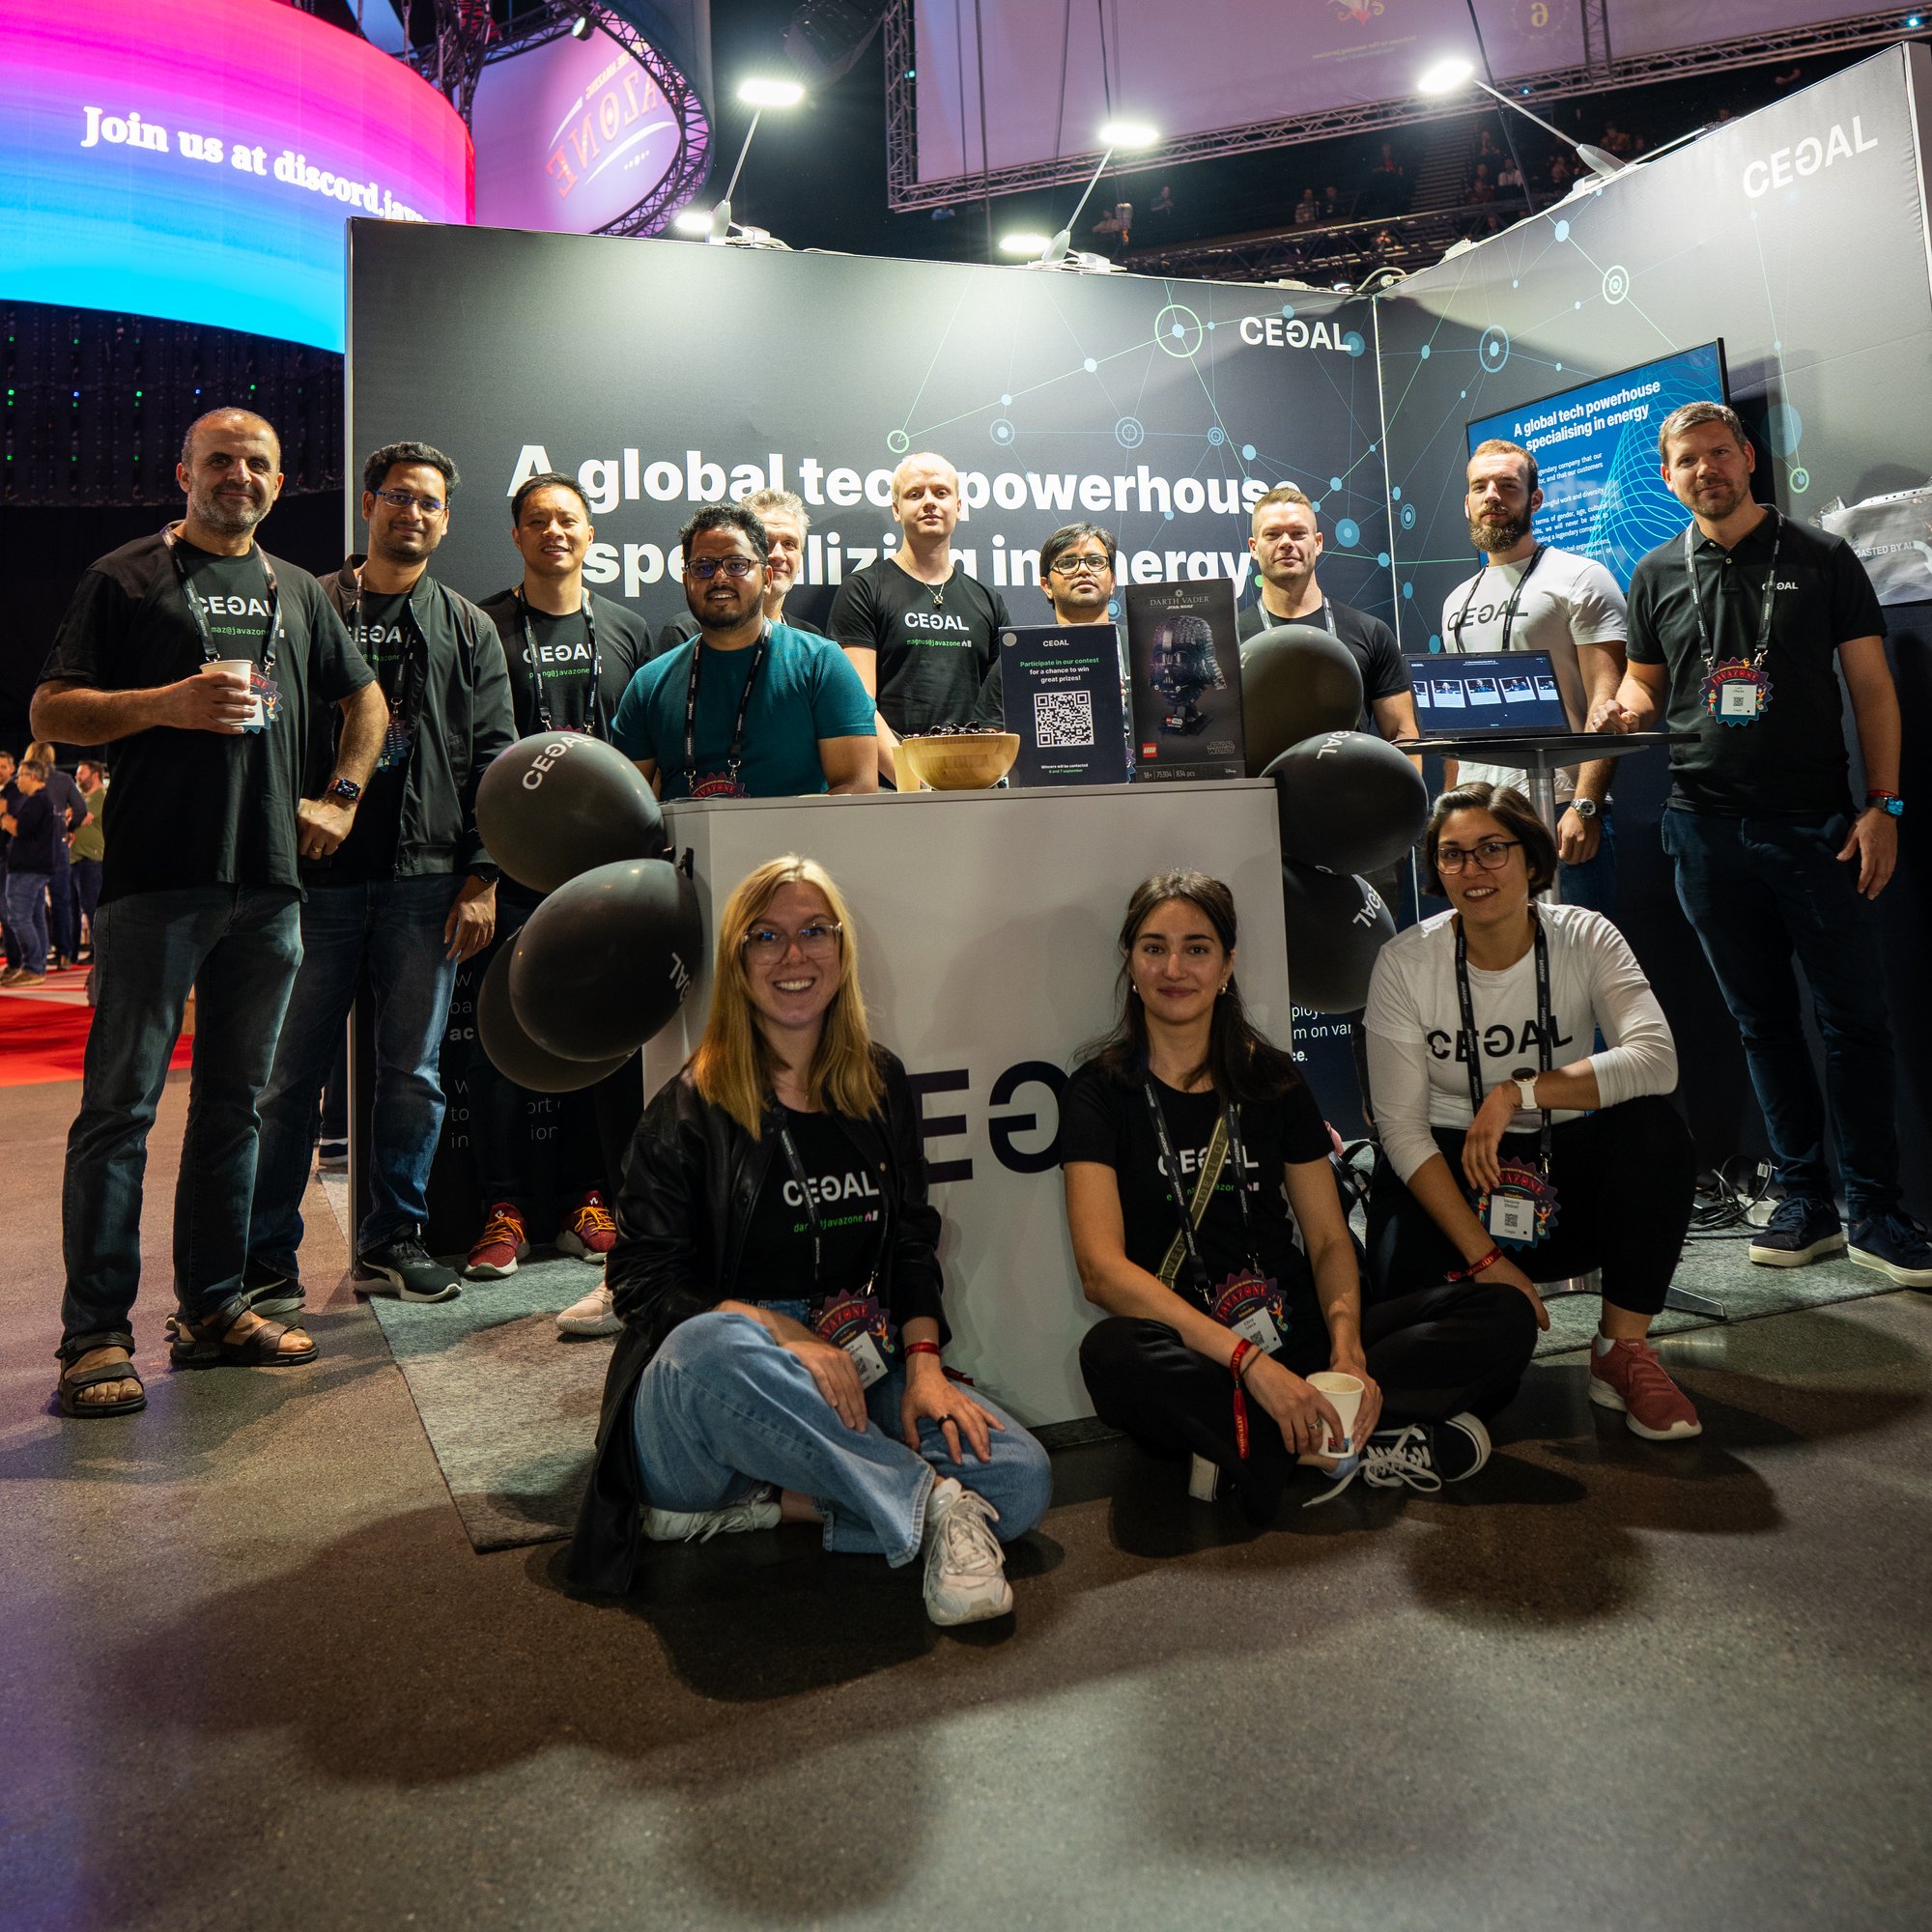 The Cegal team at JavaZone